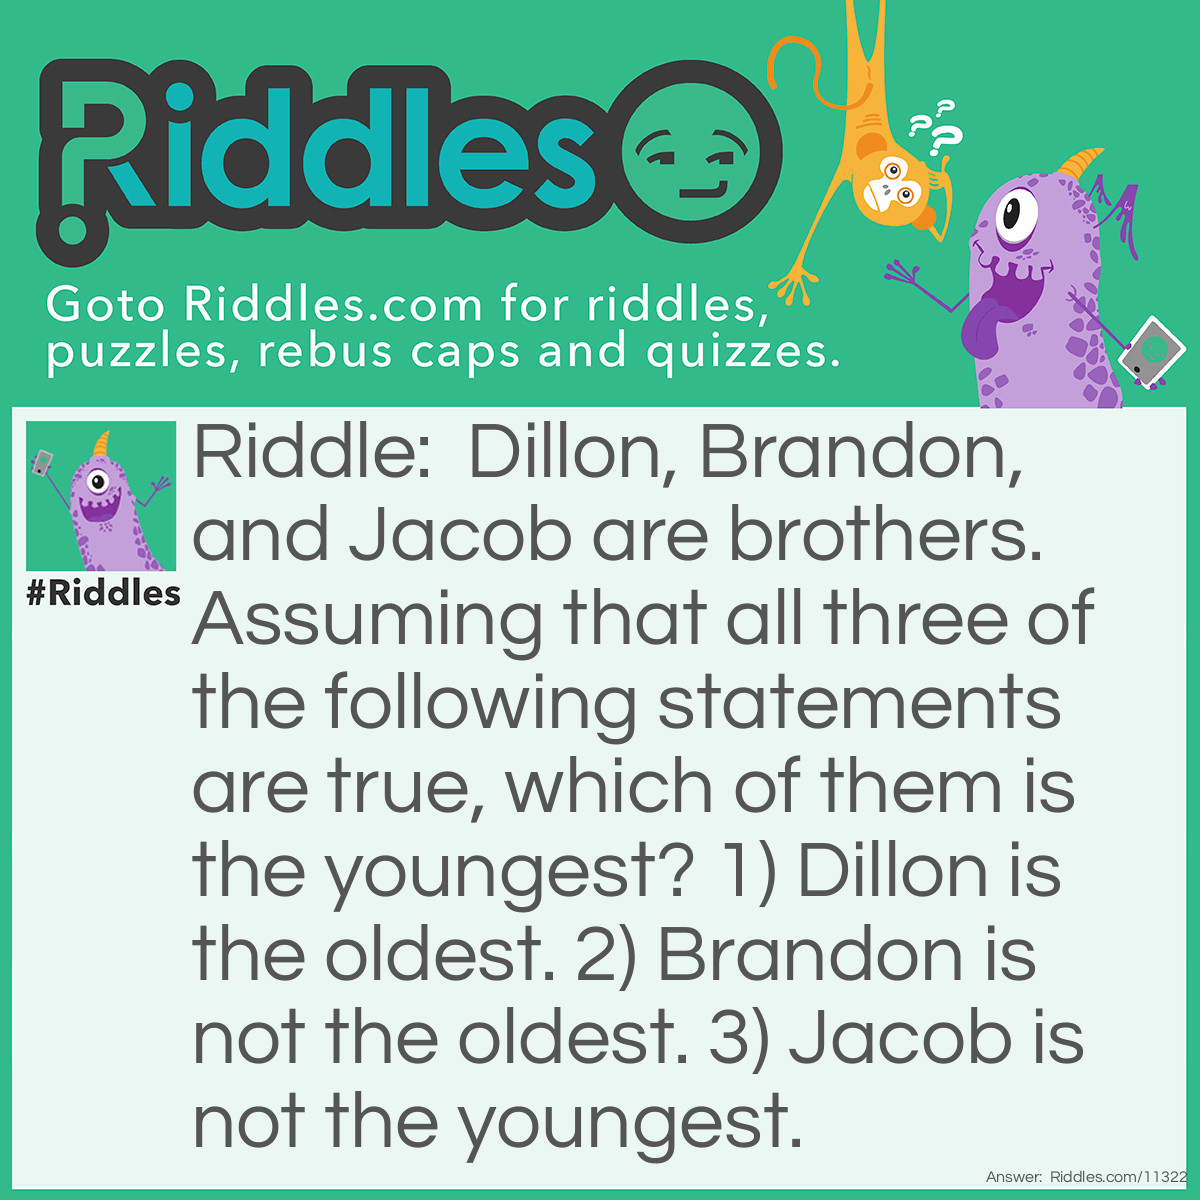 Riddle: Dillon, Brandon, and Jacob are brothers. Assuming that all three of the following statements are true, which of them is the youngest? 1) Dillon is the oldest. 2) Brandon is not the oldest. 3) Jacob is not the youngest. Answer: Brandon is the youngest brother. Dillon cannot be the youngest brother because the first statement says that he is the oldest; he can't be the oldest brother and the youngest one at the same time. Jacob cannot be the youngest brother either, because the third statement says that he is NOT the youngest; he can't be the youngest brother and NOT the youngest one at the same time. This leaves us with Brandon.